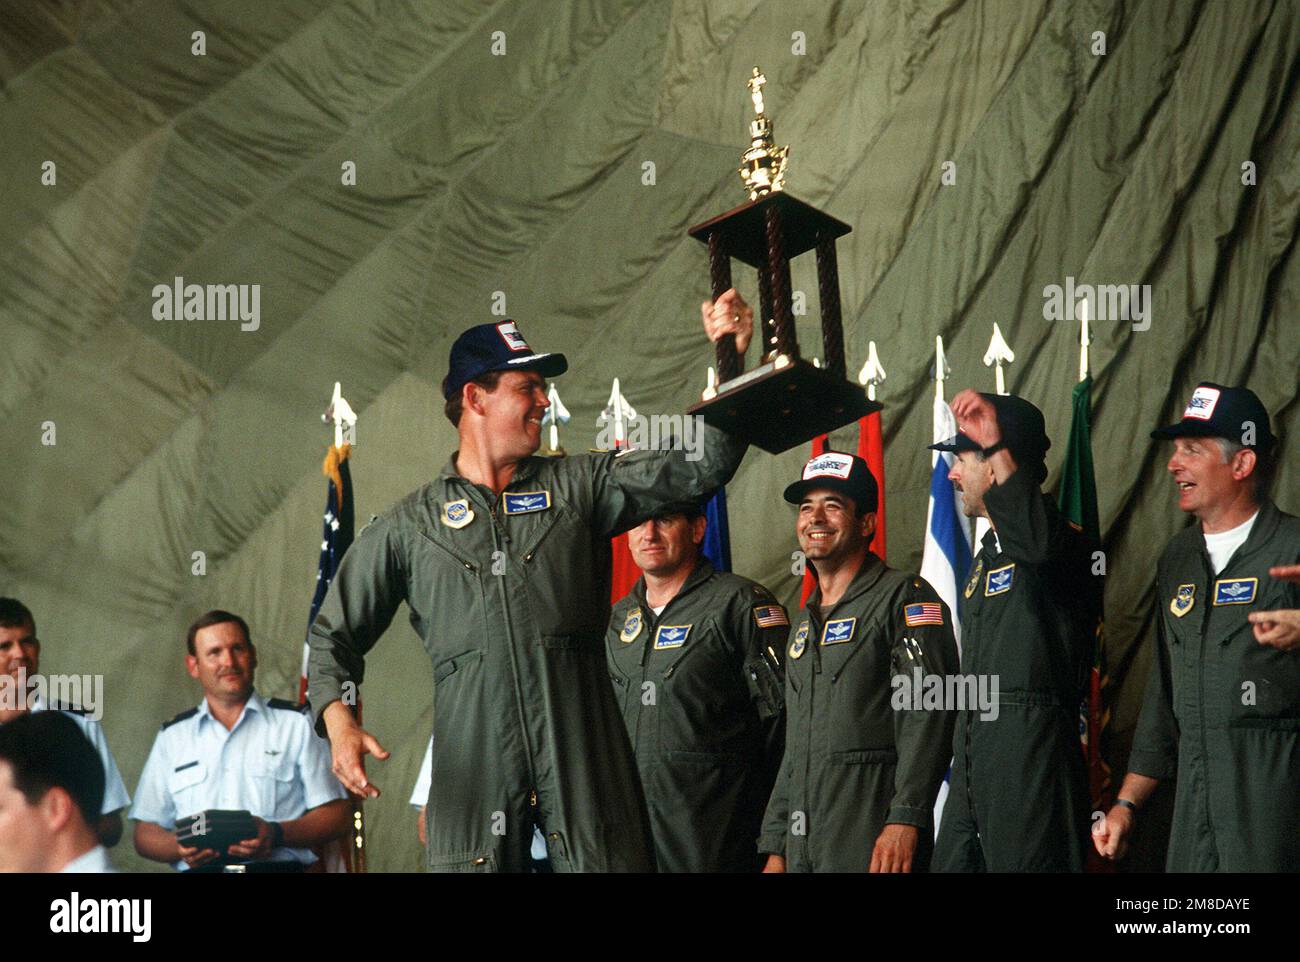 MAJ I. Clontz, team chief for the 145th Tactical Airlift Group (TAG) of the North Carolina Air National Guard, proudly hoists the trophy his team won for best United States team for Airlift Rodeo '90. The 145th TAG, representing the 123rd Tactical Airlift Wing of Standiford Field, KY, placed third in the Best Overall category. Airlift Rodeo is an annual airdrop competition that tests the flight and ground skills of military Airlift Command aircrews as well as foreign teams.. Base: Pope Air Force Base State: North Carolina(NC) Country: United States Of America(USA) Stock Photo